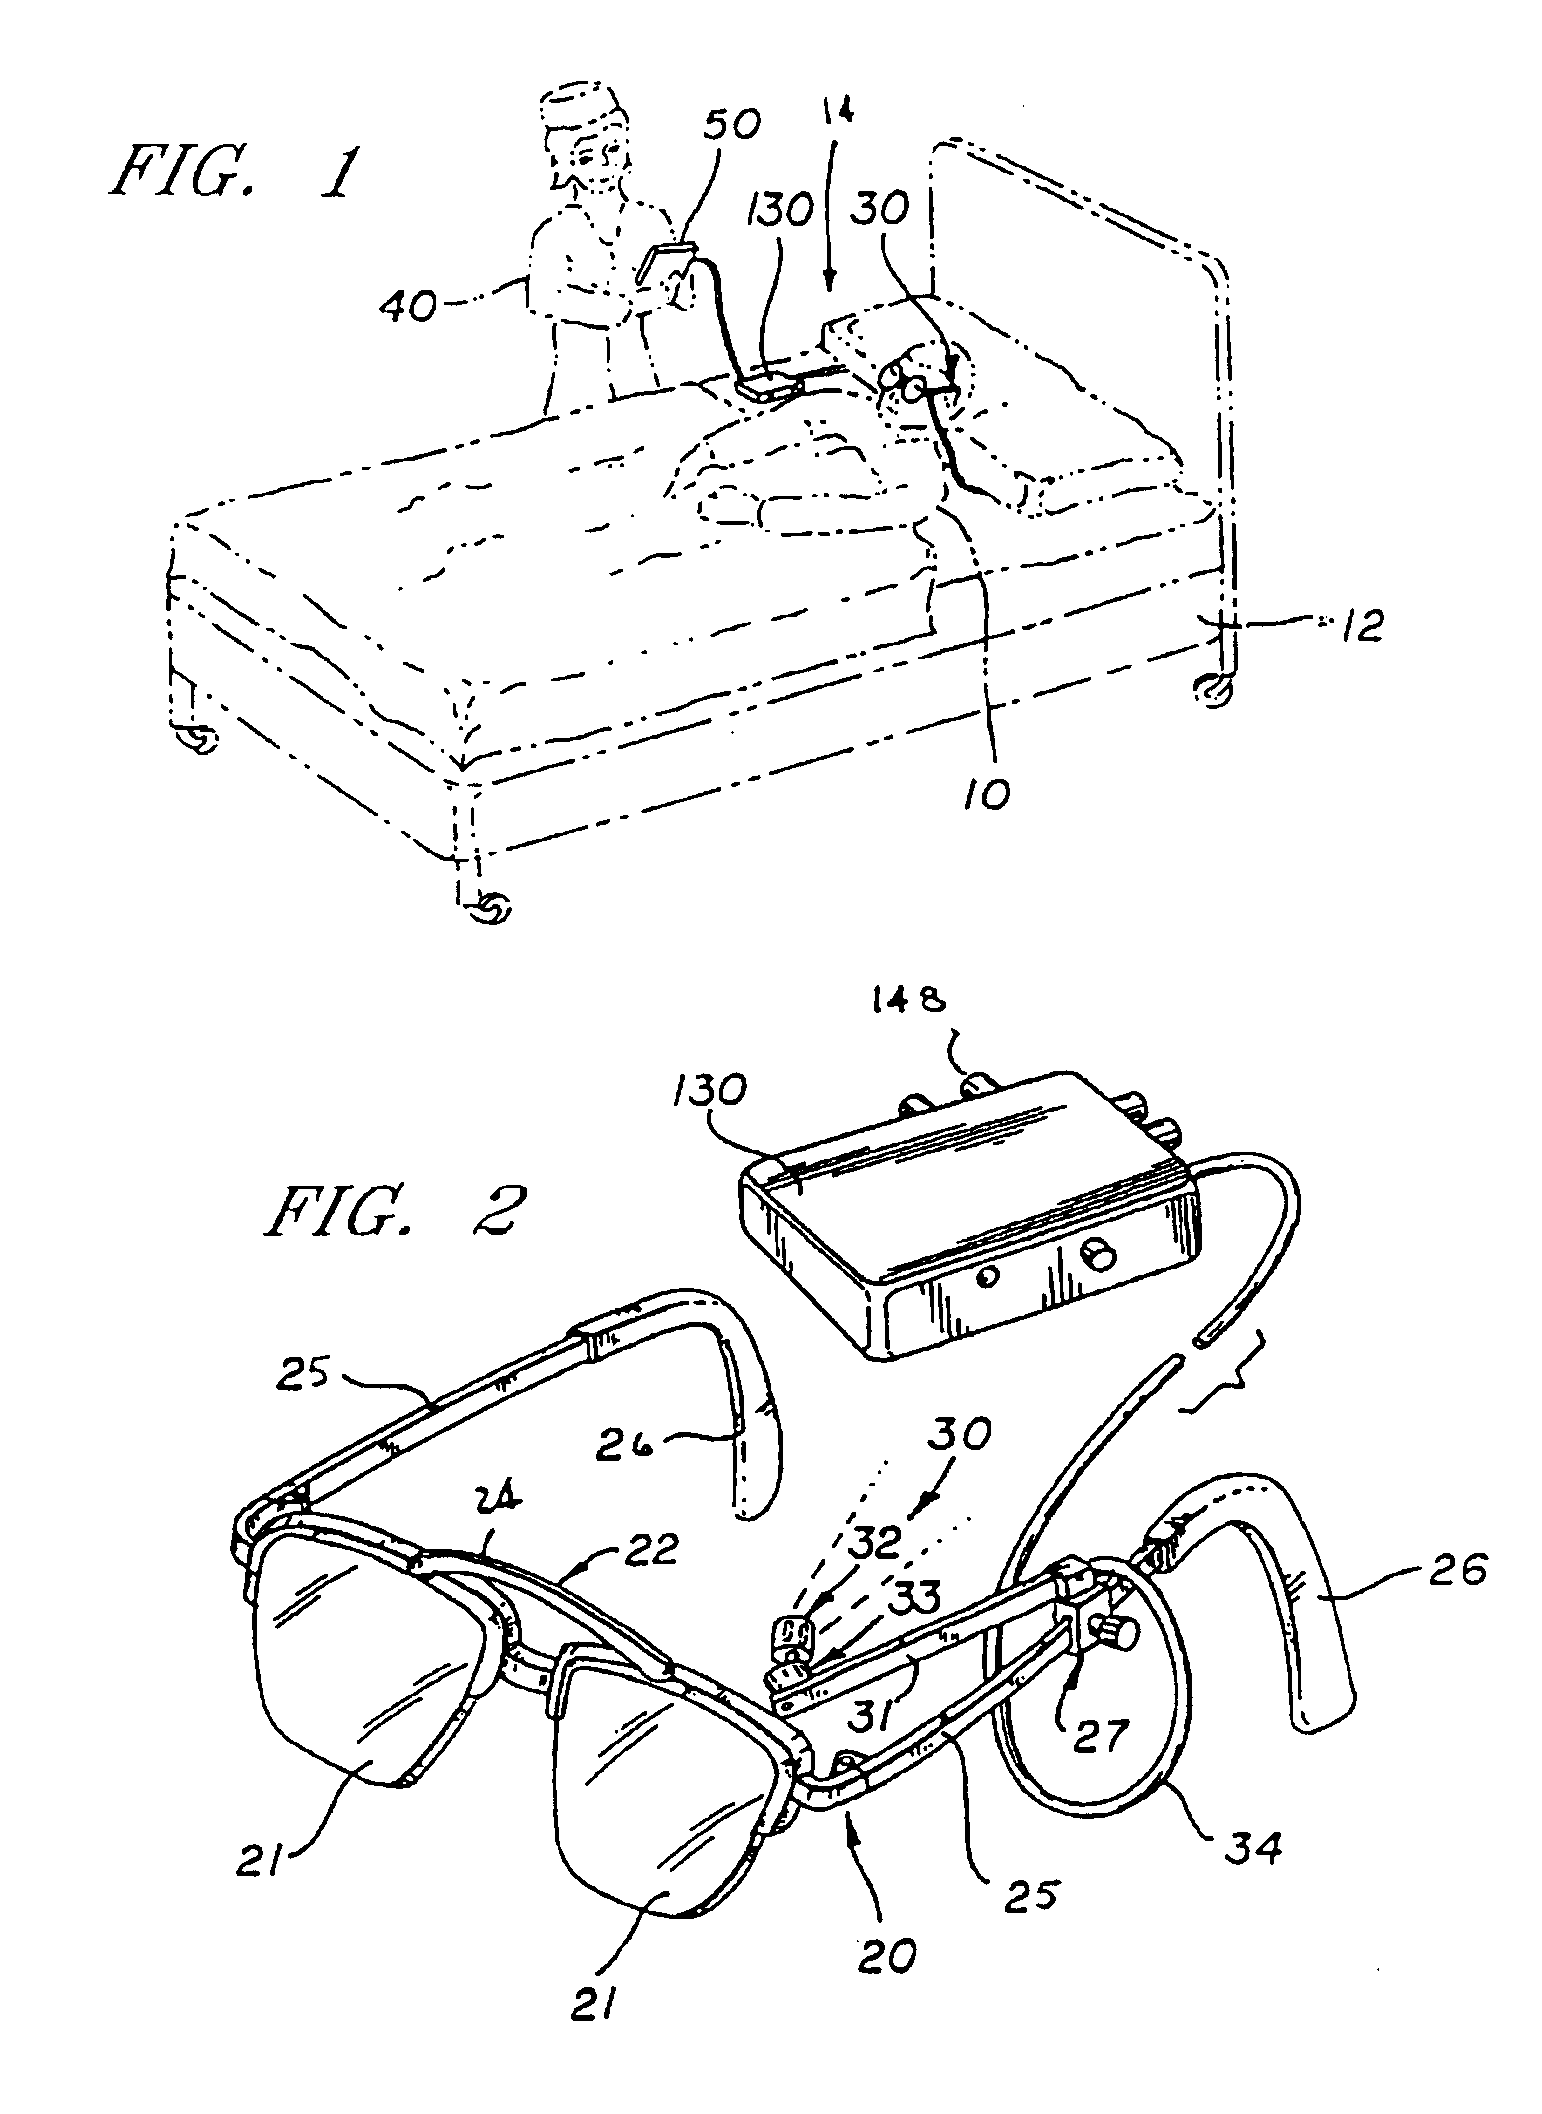 System and method for monitoring eye movement